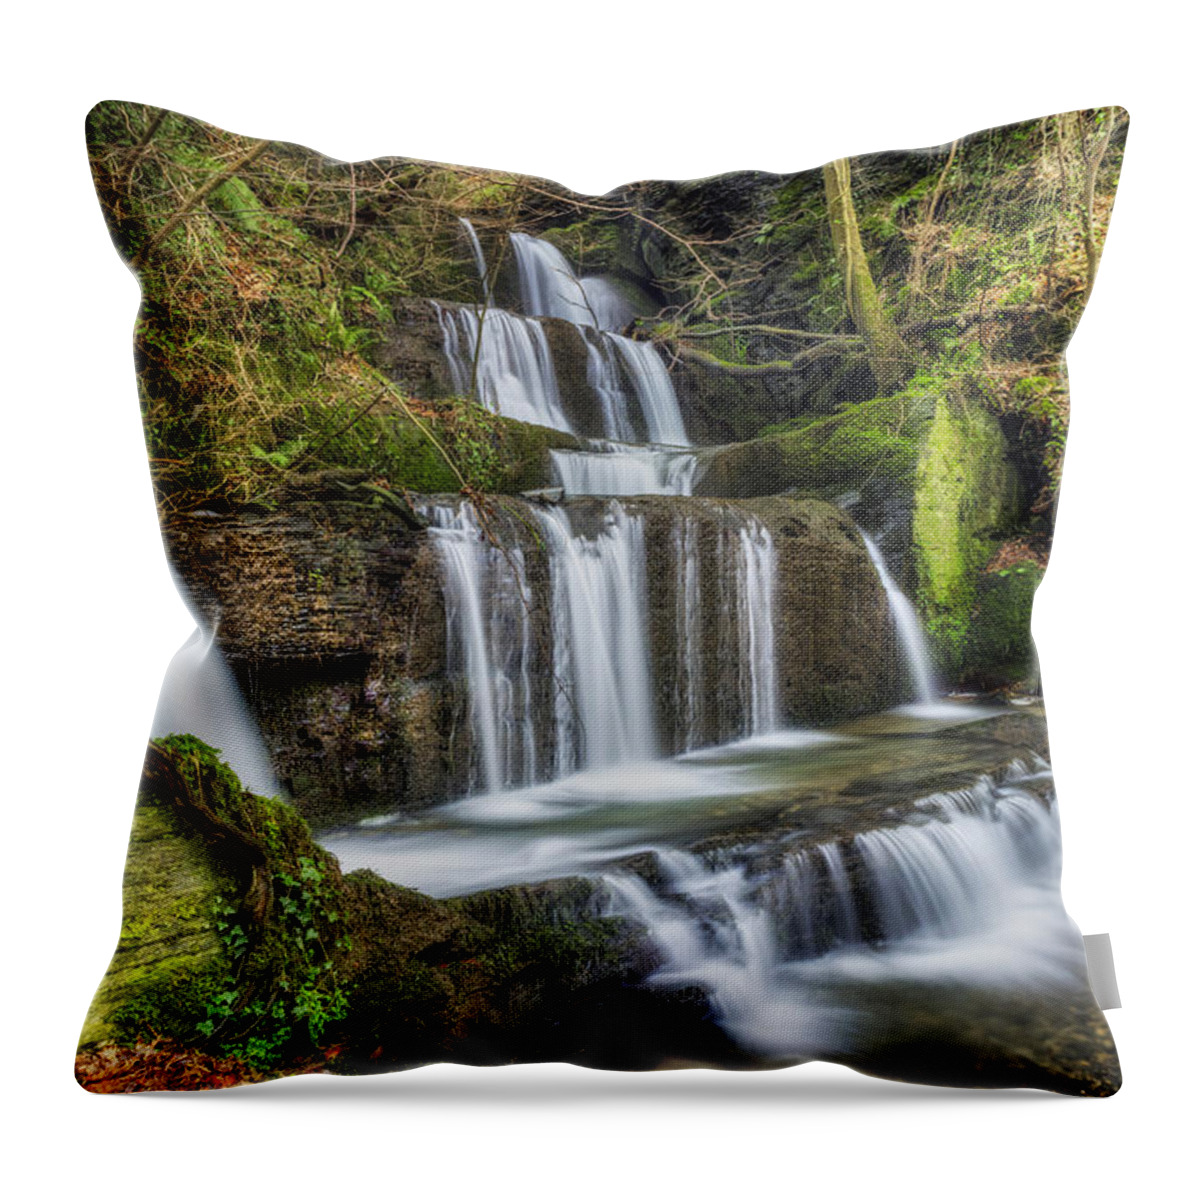 Waterfall Throw Pillow featuring the photograph Autumn Waterfall by Ian Mitchell